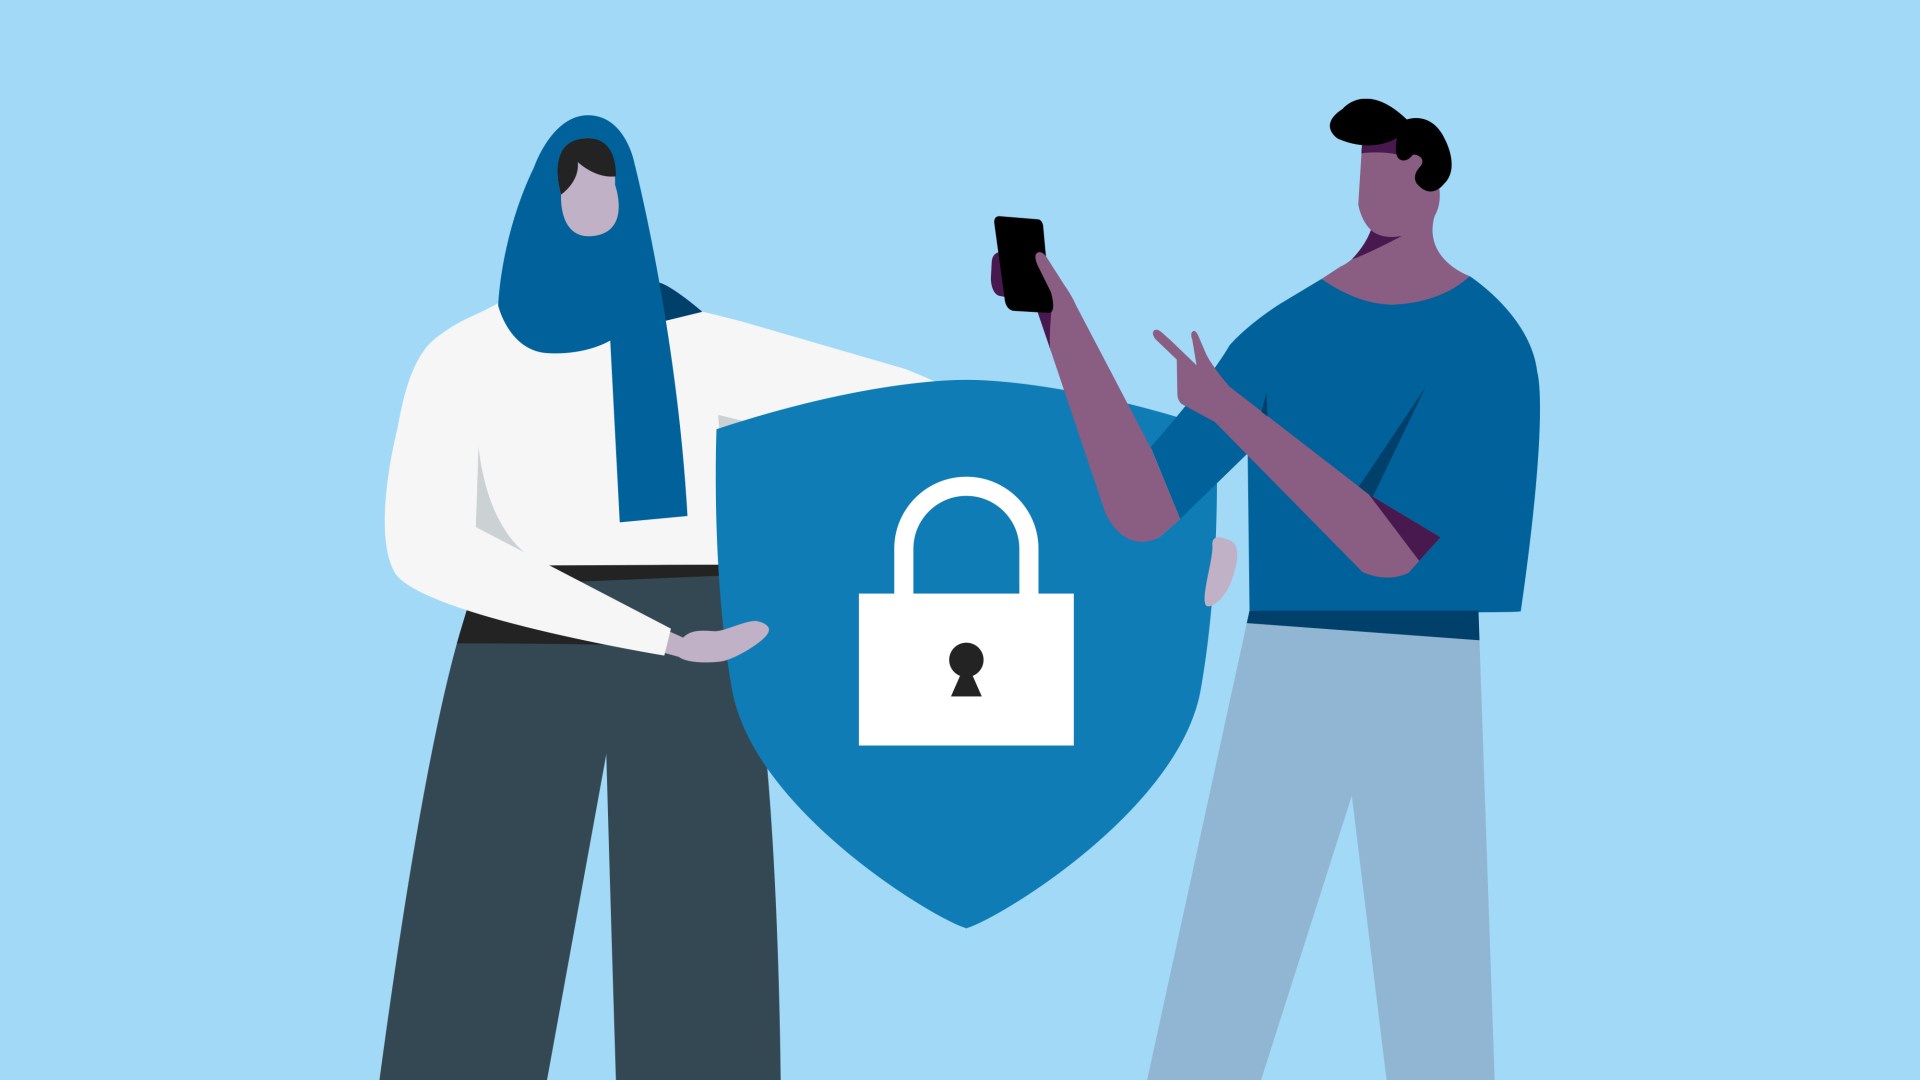  Two people, one holding a phone and the other holding a shield with a lock on it, symbolizing the importance of respecting privacy when taking Instagram screenshots.